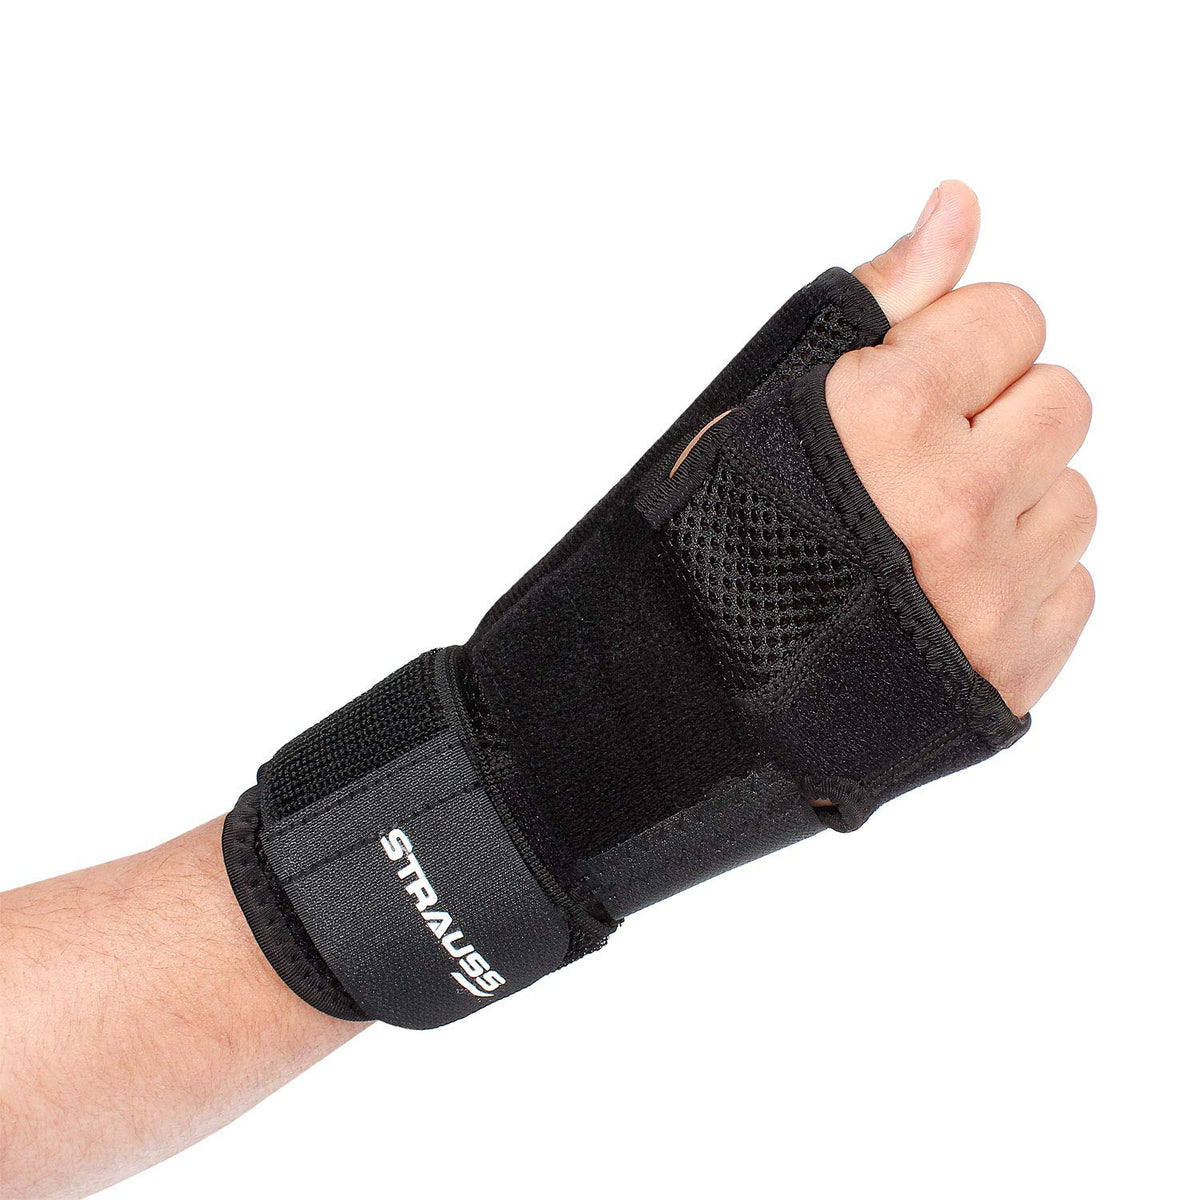 Strauss Thumb Support with Wrist Wrap, Free Size, (Black)